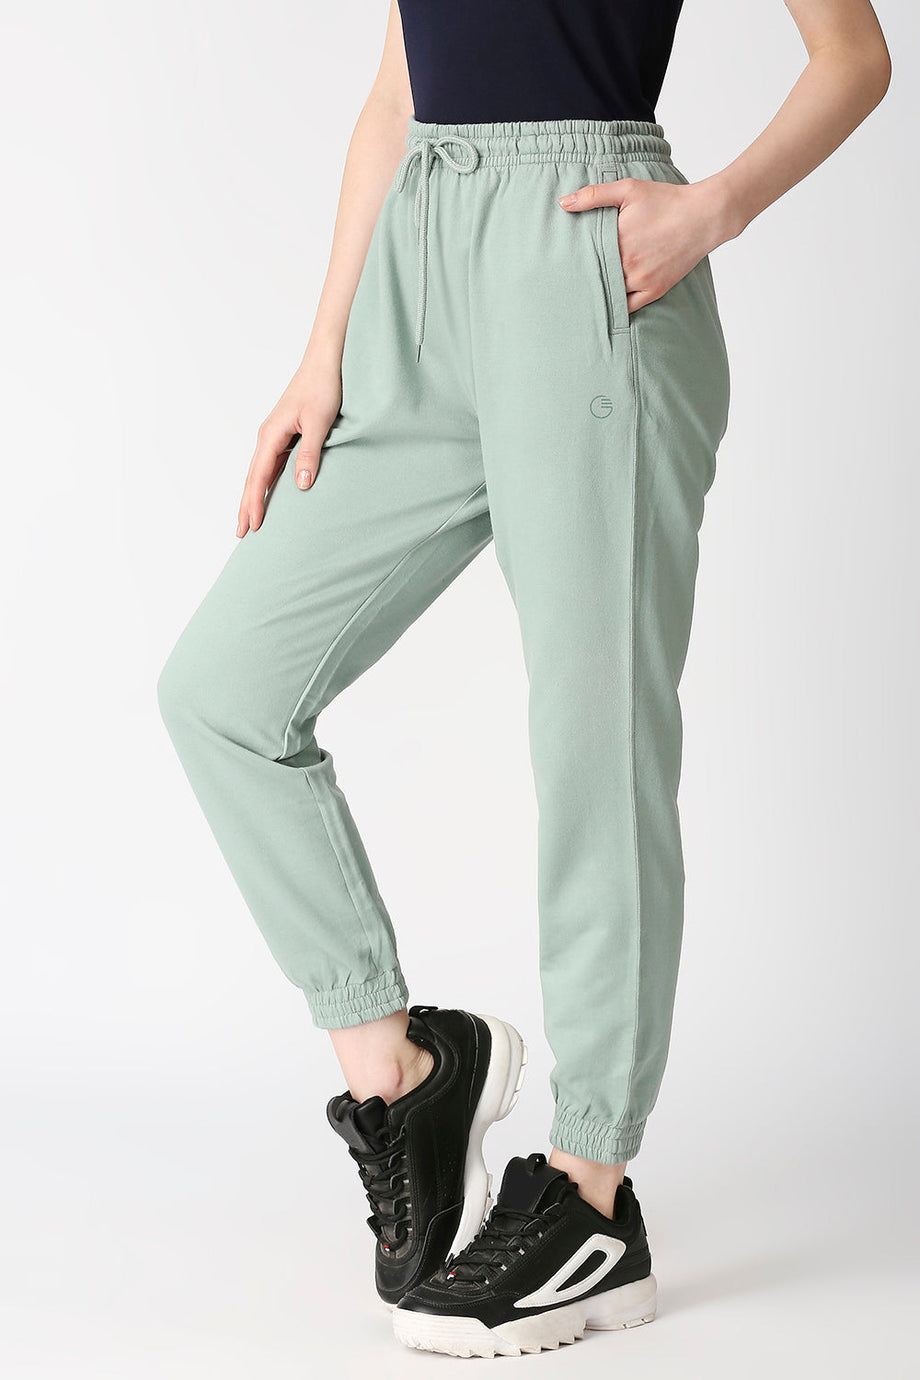 Buy Joggers Online in India for Women